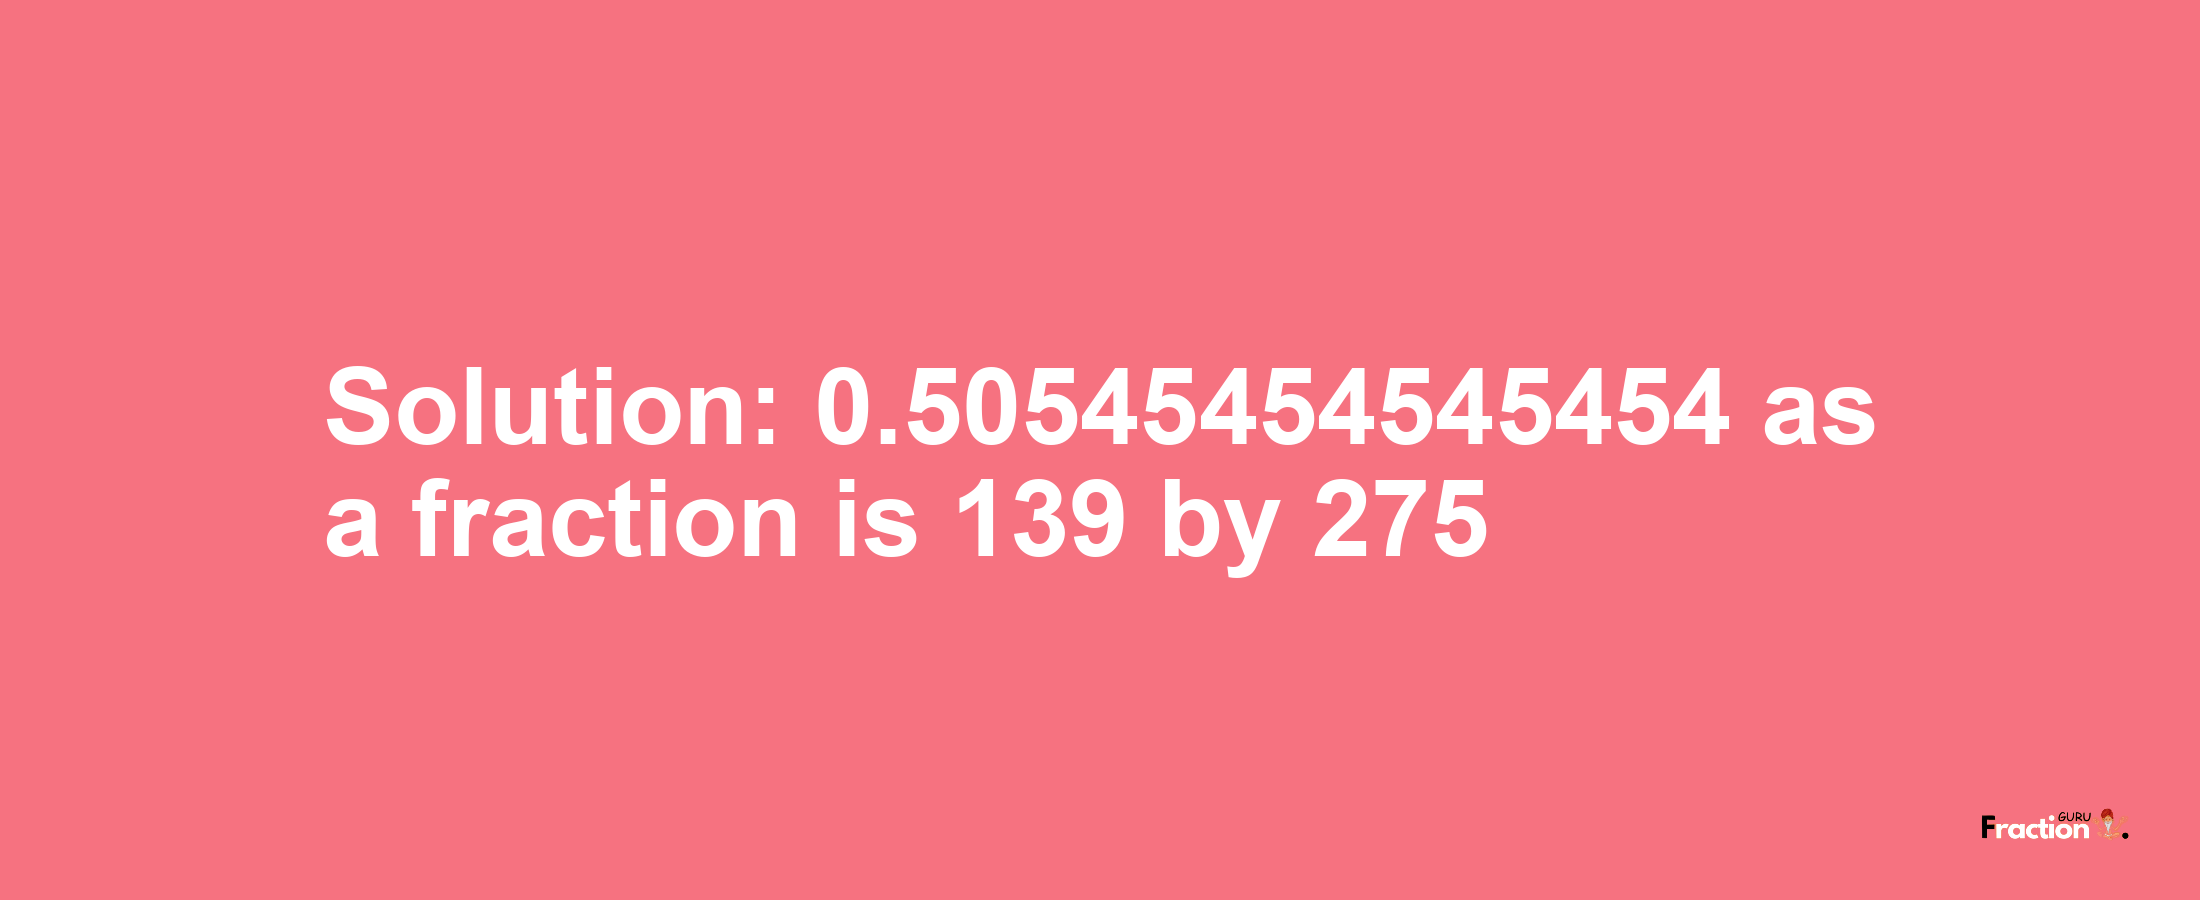 Solution:0.50545454545454 as a fraction is 139/275